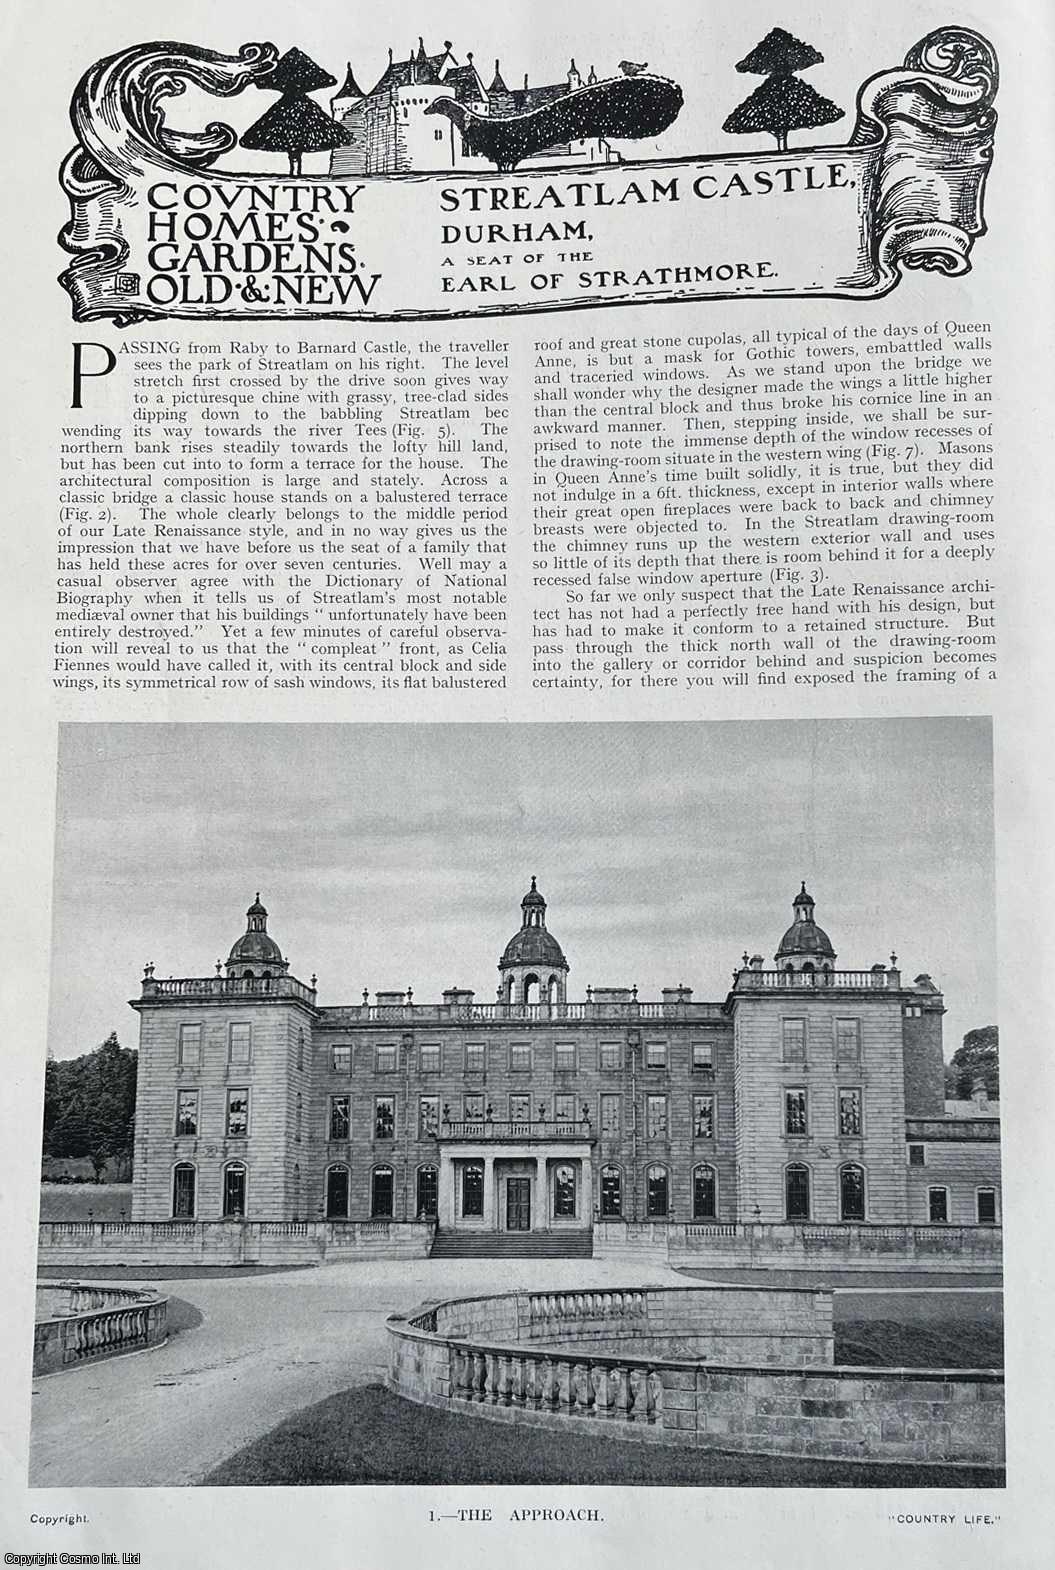 Country Life Magazine - Streatlam Castle, Durham. Several pictures and accompanying text, removed from an original issue of Country Life Magazine, 1915.